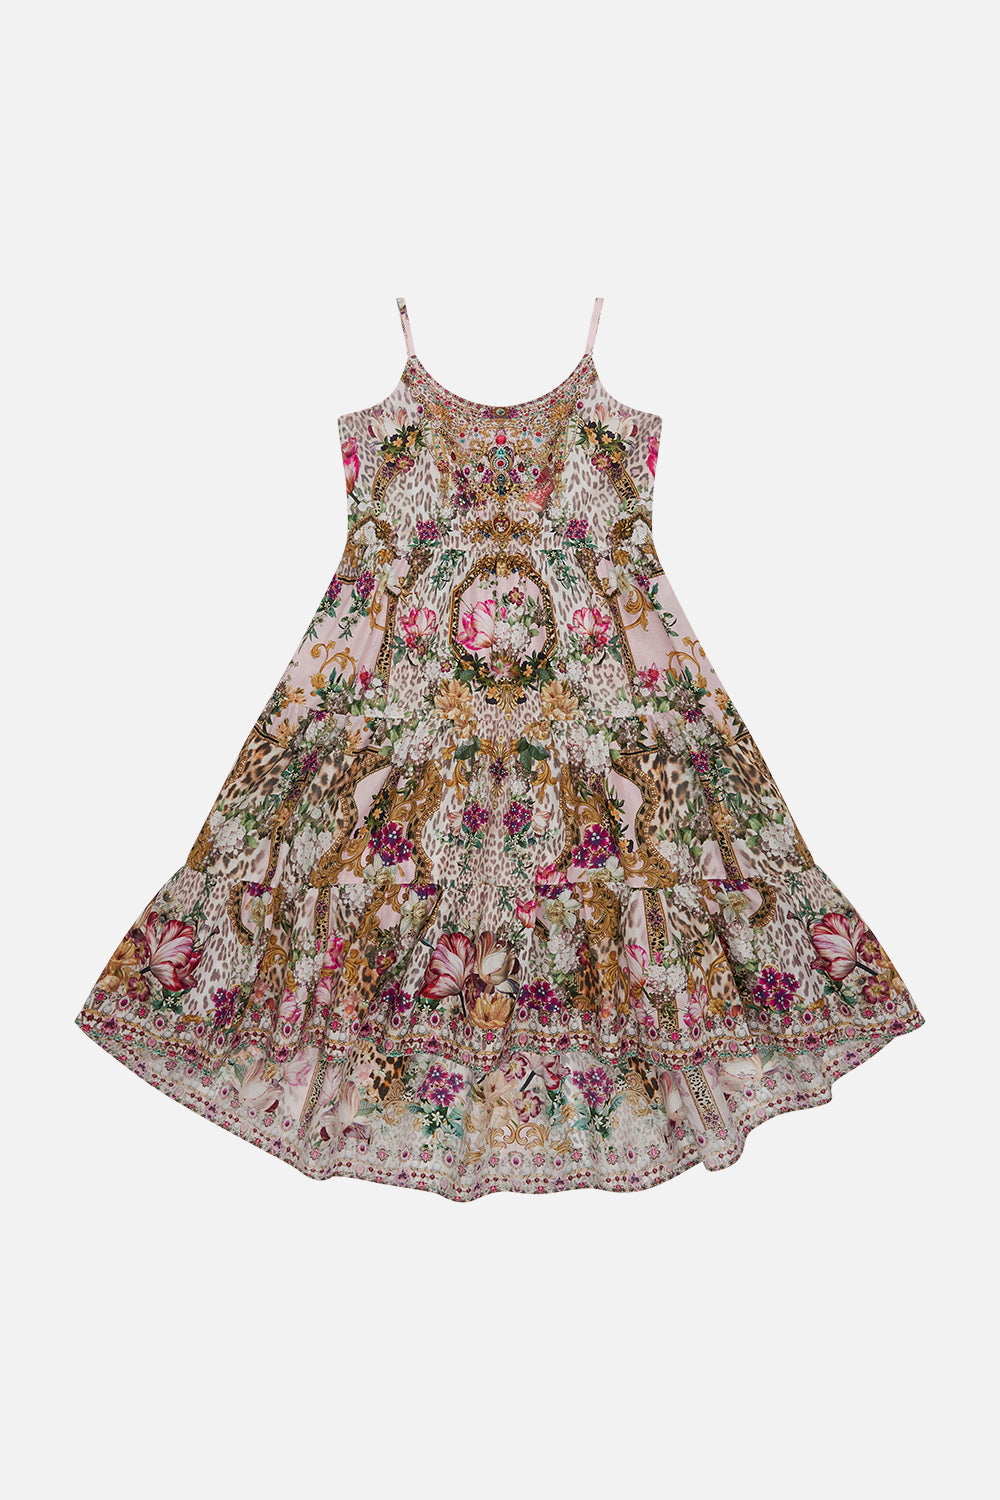 Product view of MILLA BY CAMILLA kids dress in Bambino Bliss print